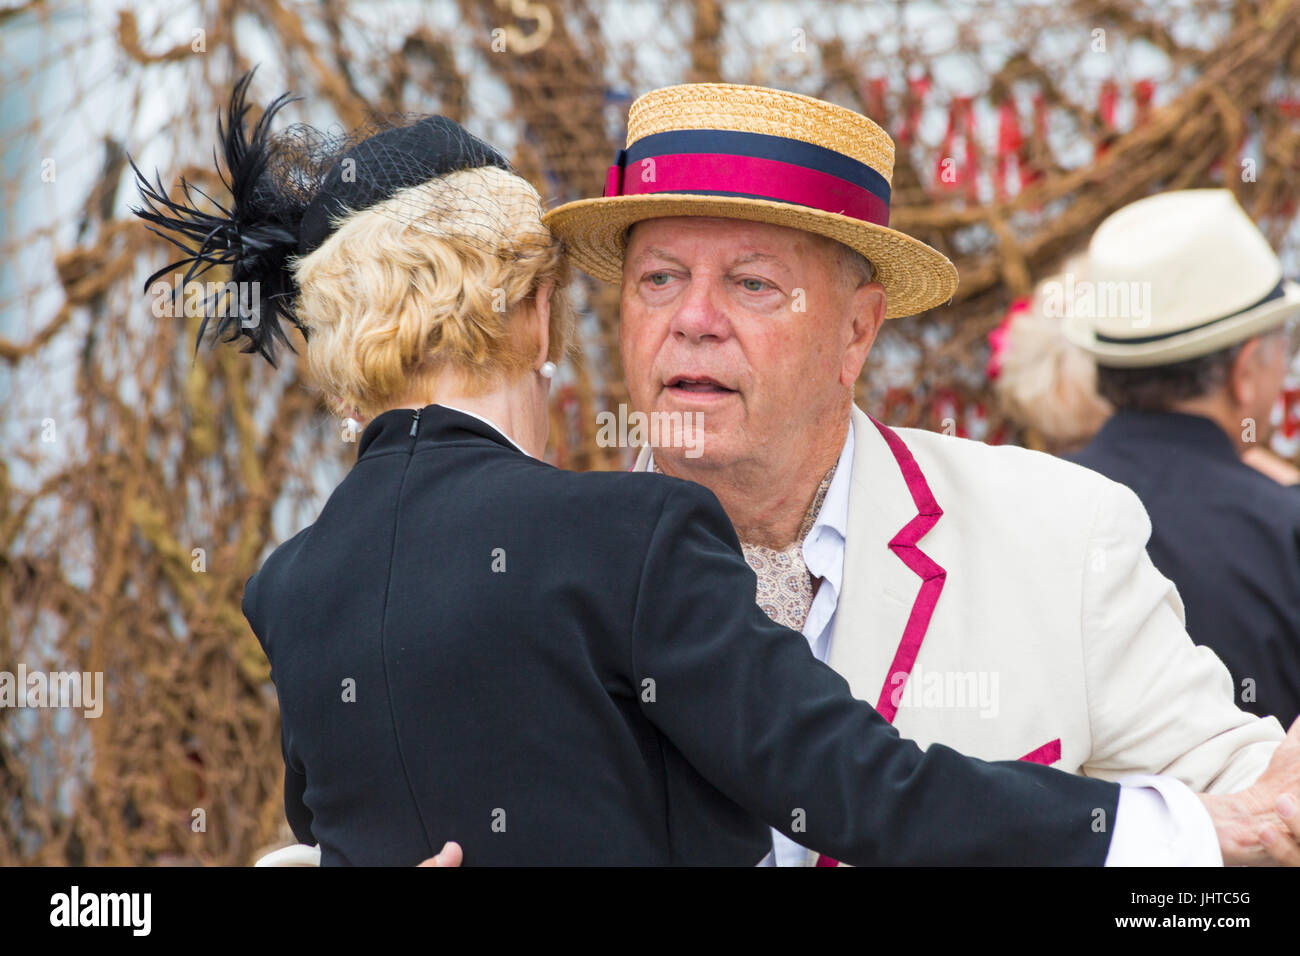 Poole Goes Vintage, Poole, Dorset, UK. 16th July 2017. Poole Goes Vintage Event takes place on the Quay - visitors dress up in vintage clothes. Credit: Carolyn Jenkins/Alamy Live News Stock Photo